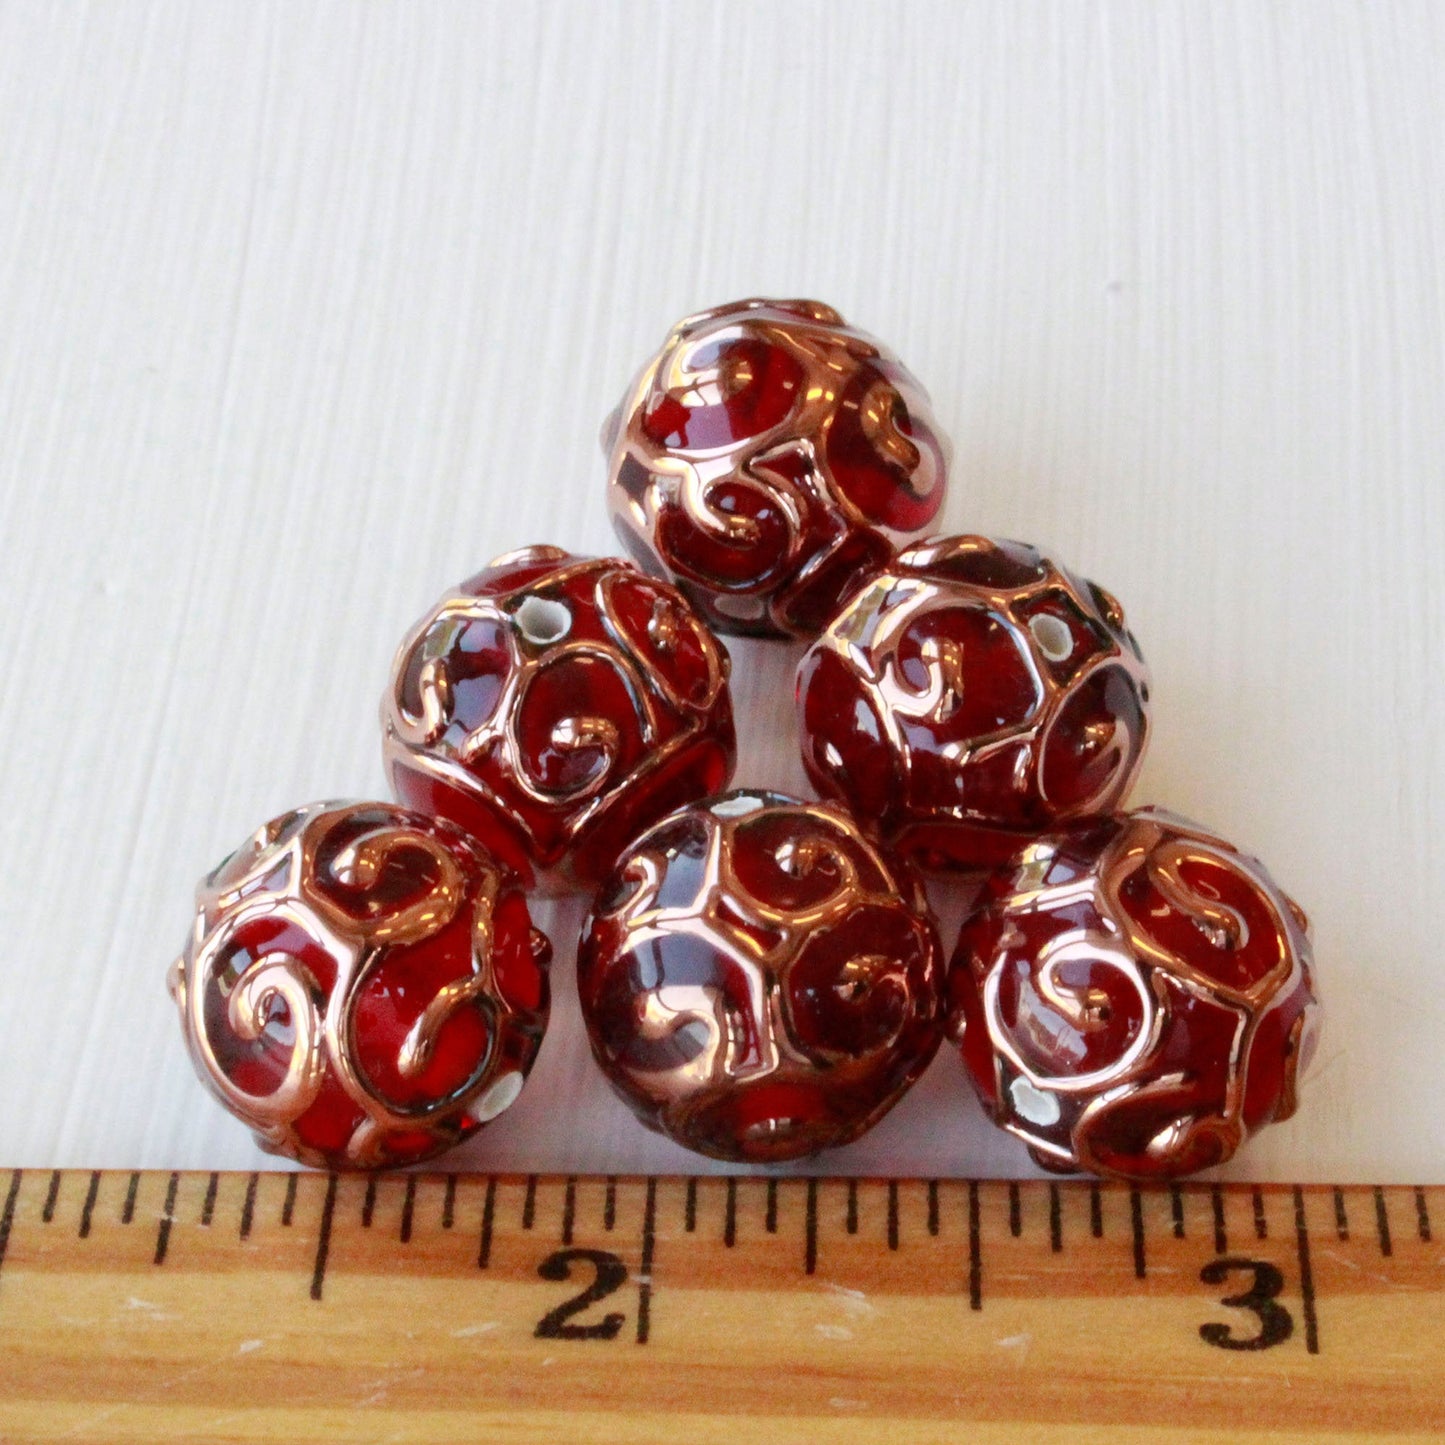 14mm Round Lampwork Beads - Red - 2,4 or 8